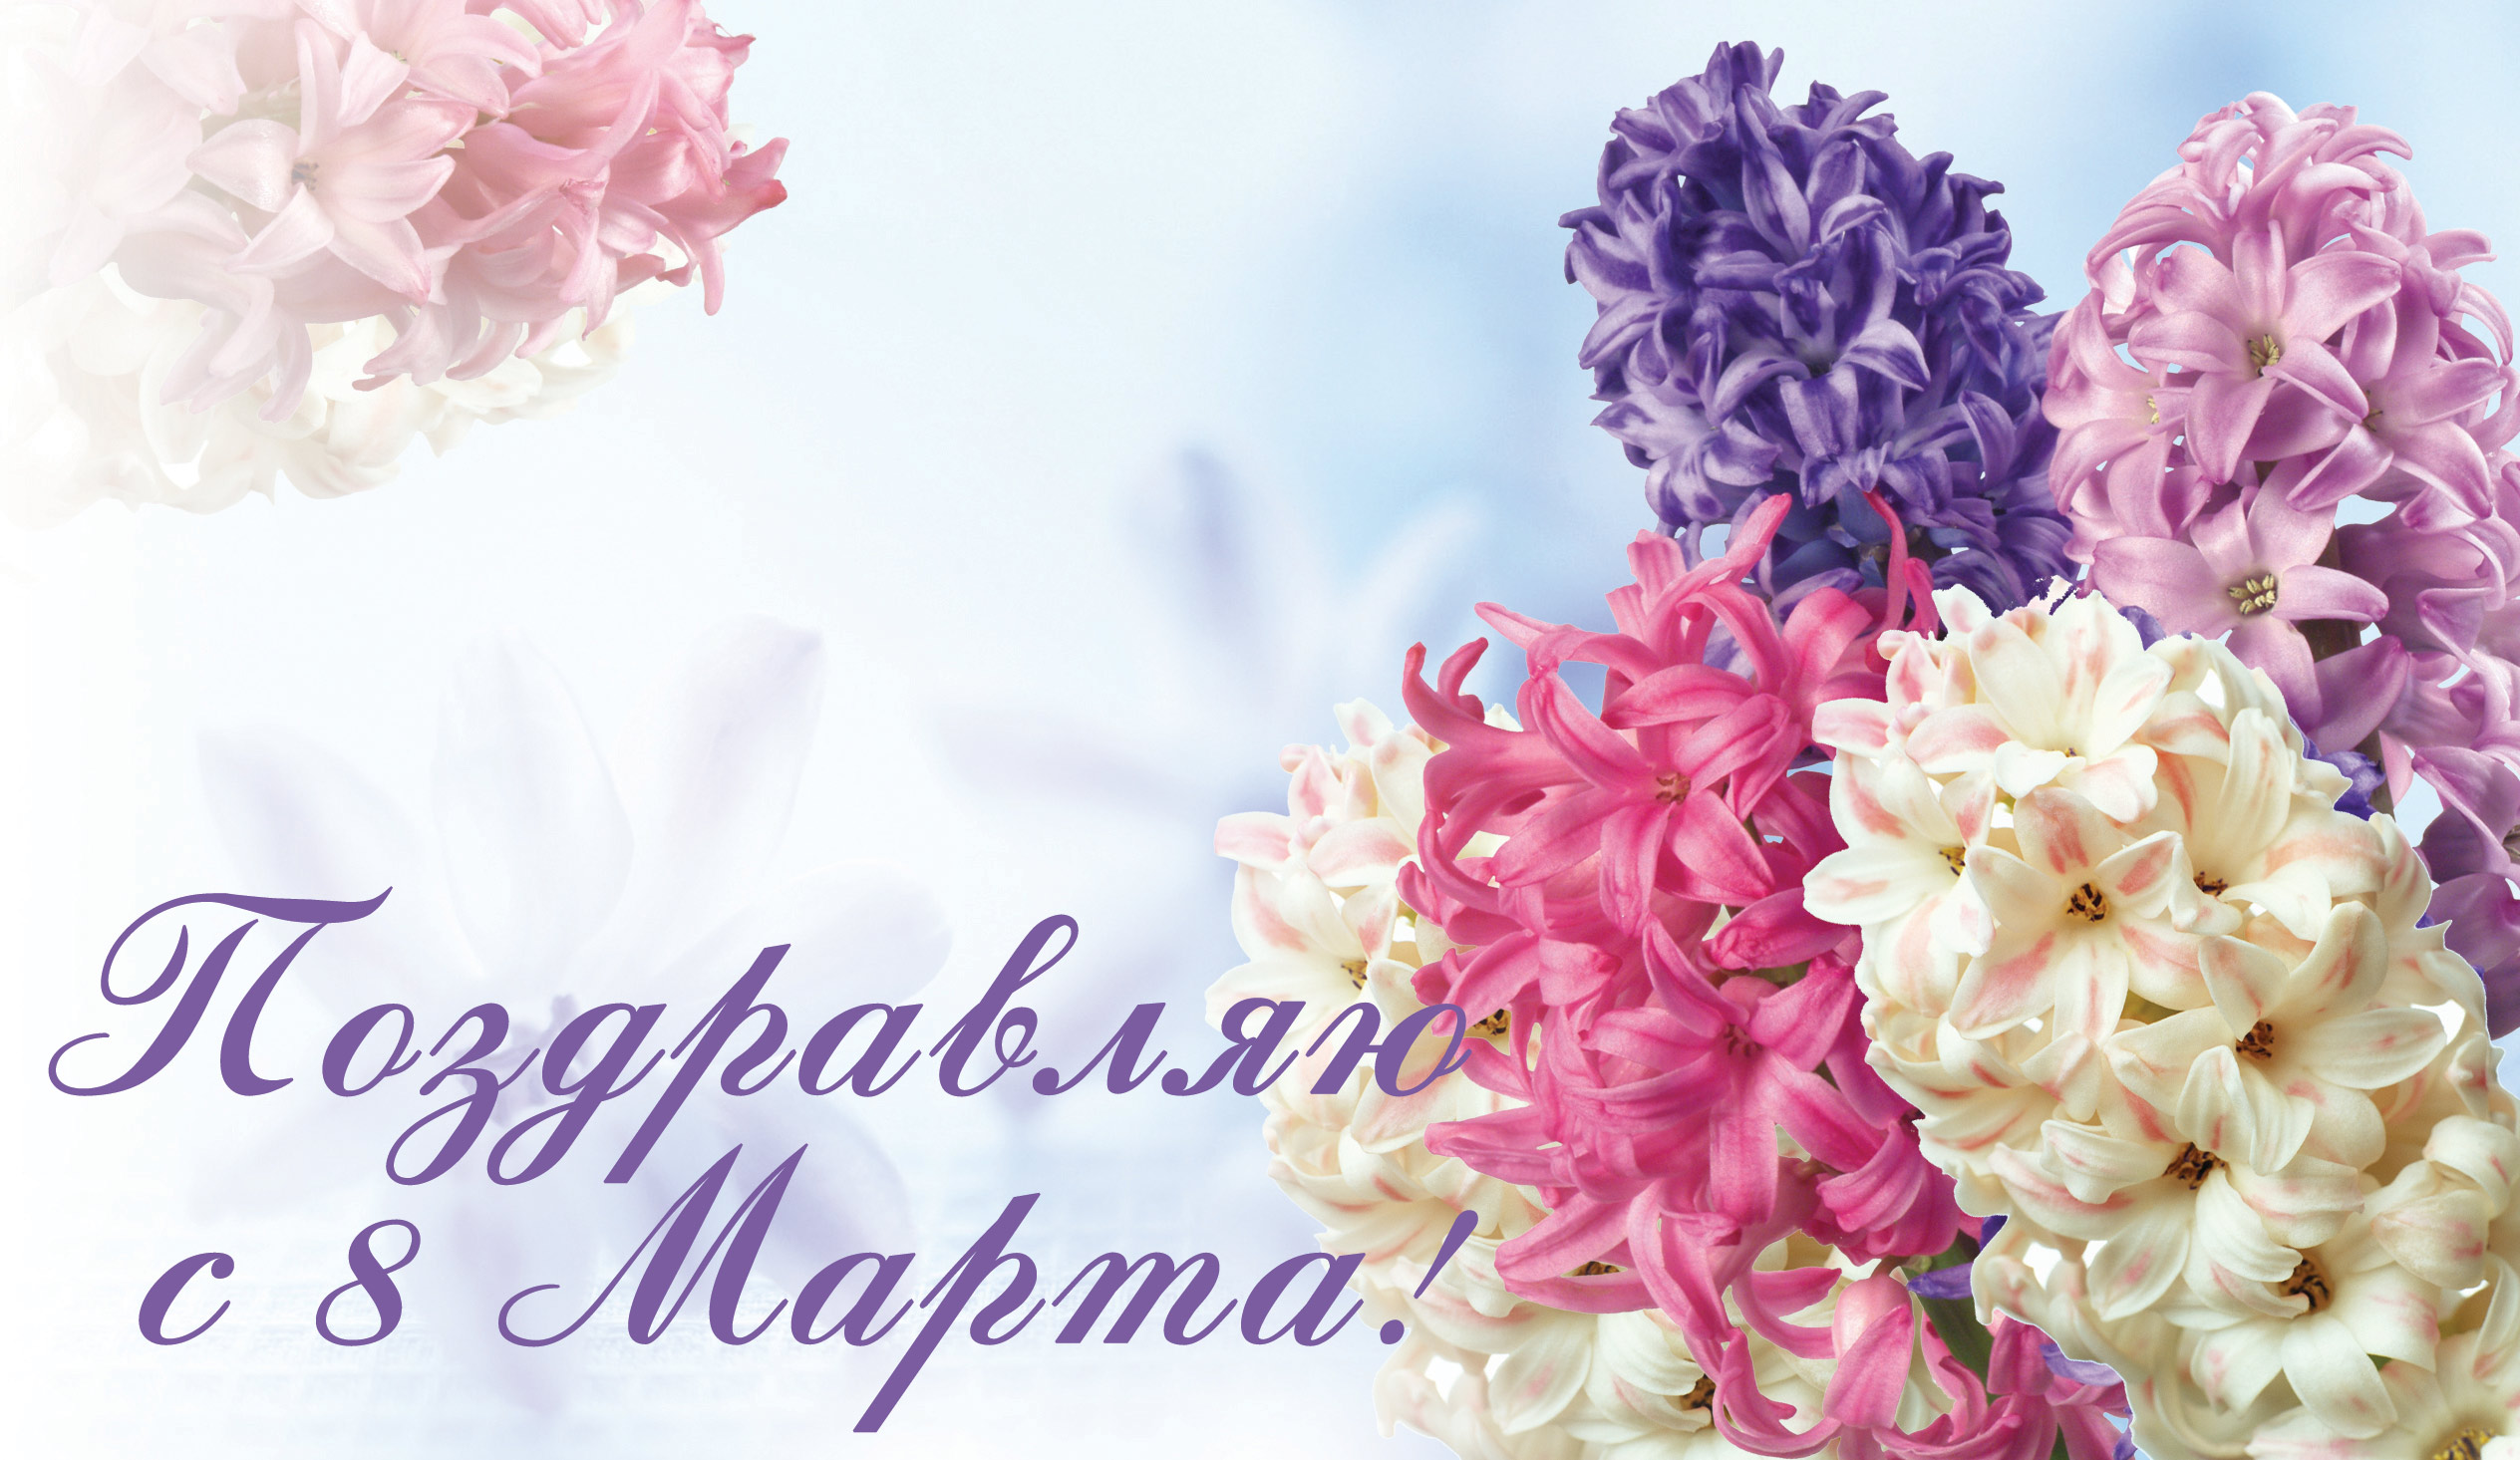 2018Holidays___International_Womens_Day_Greeting_card_with_spring_flowers_hyacinths_on_March_8_130557_.jpg